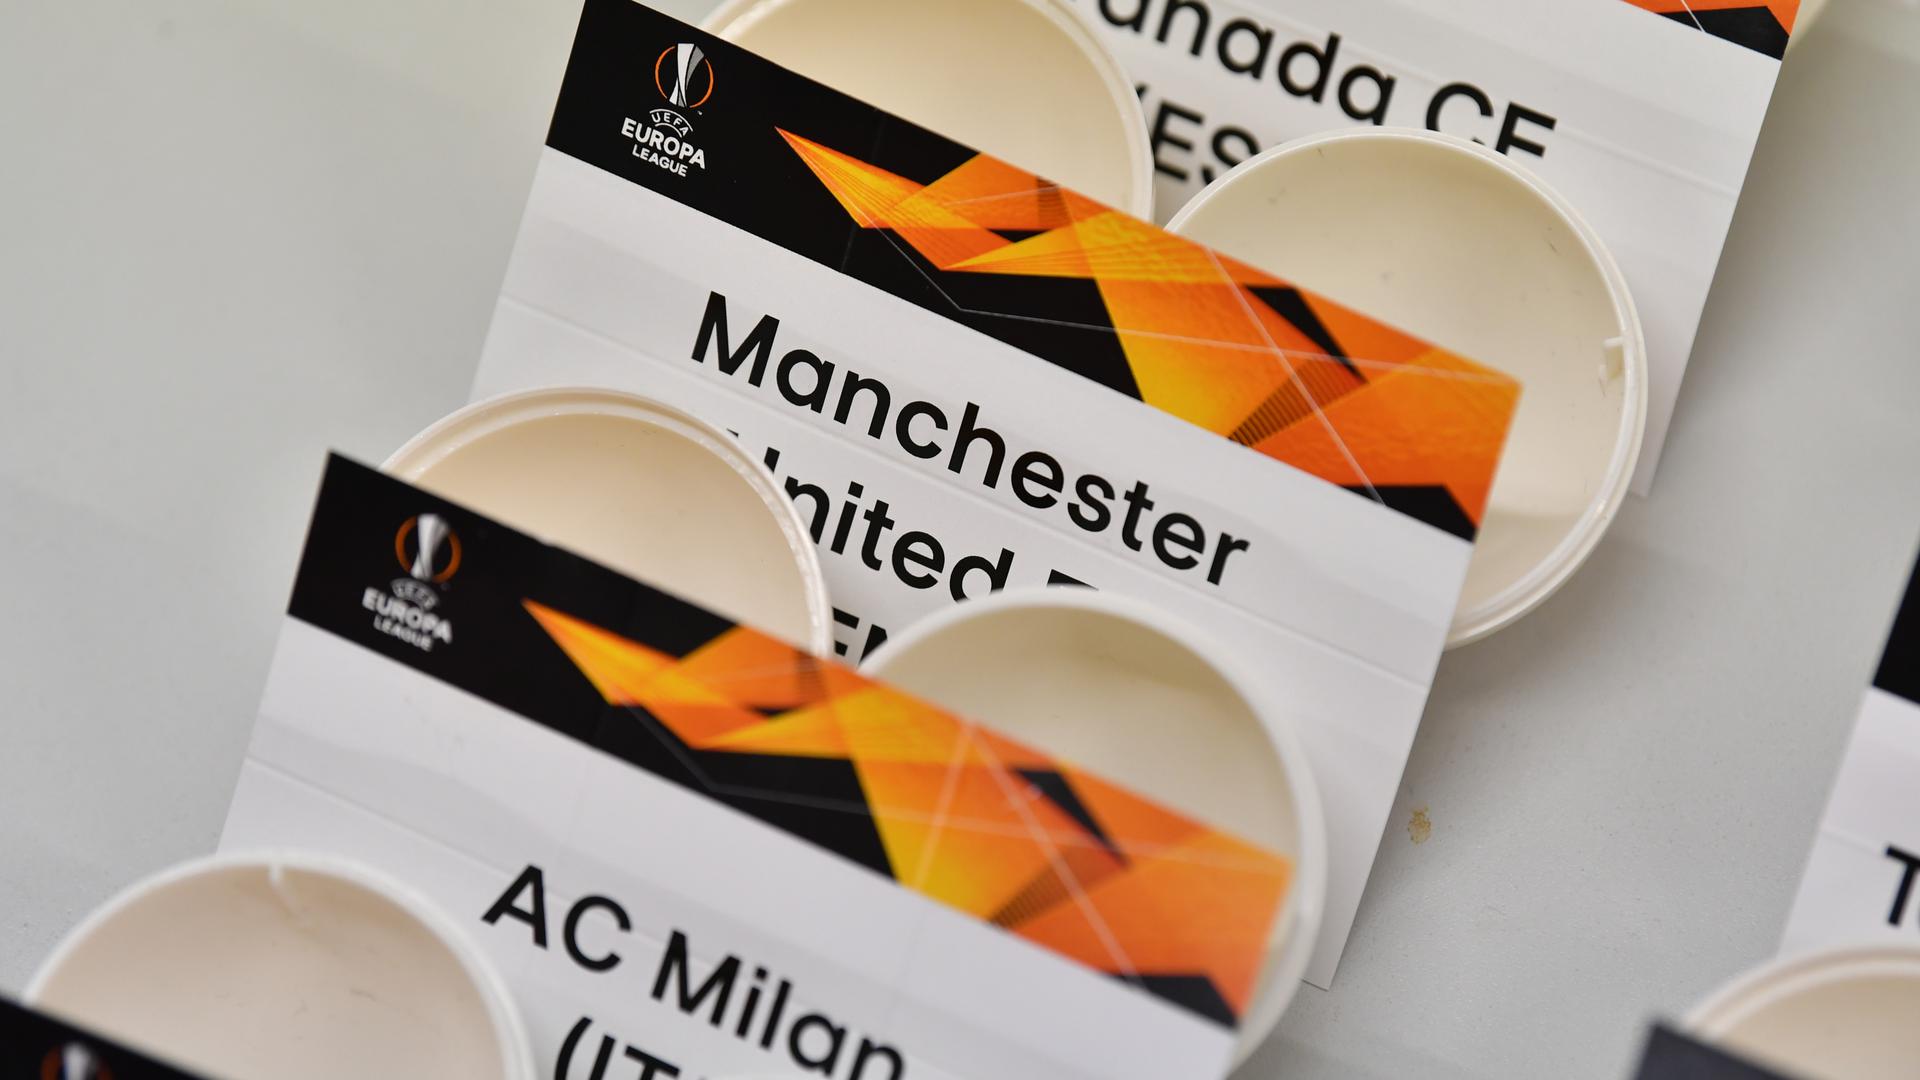 Your guide to the 2022/23 Europa League draw